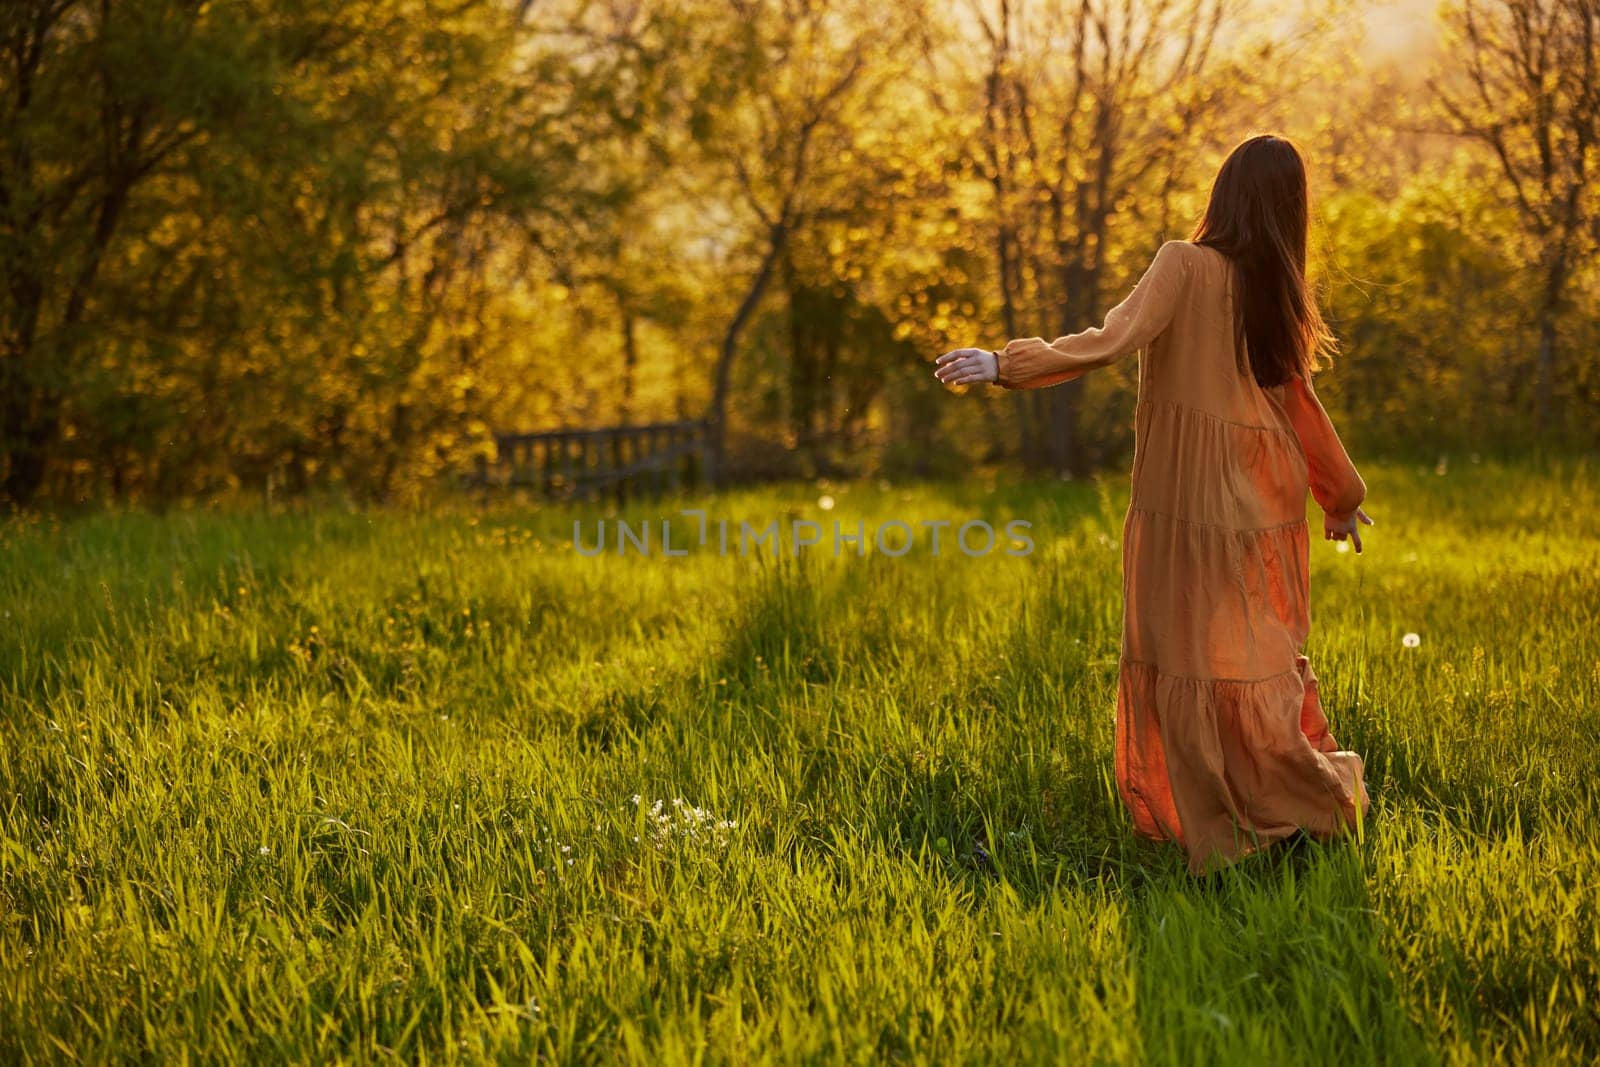 a slender woman with long hair walks in a field posing with her back to the camera, illuminated by the rays of the setting sun by Vichizh